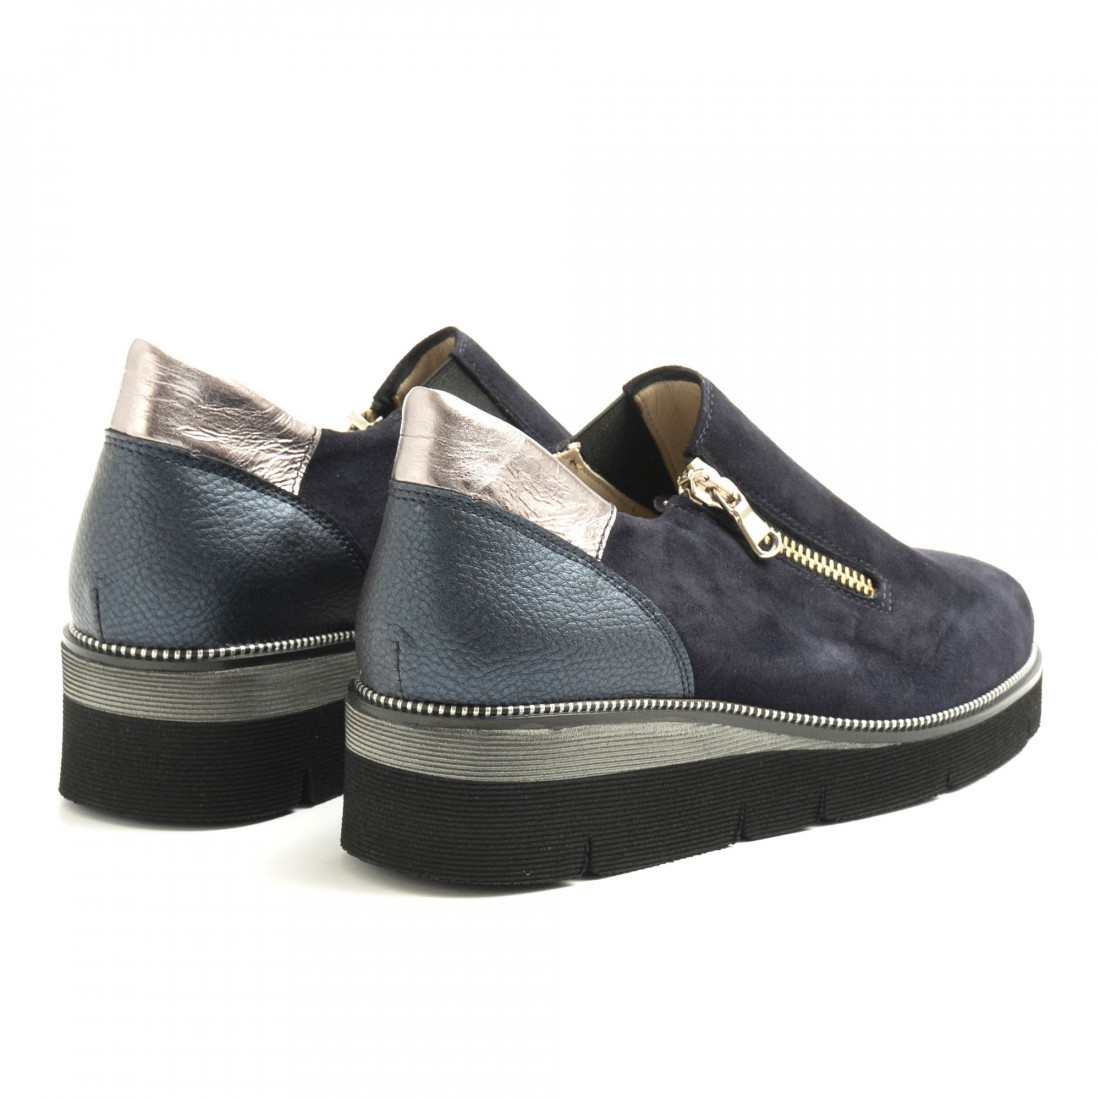 Blue suede GMB slip on with zip